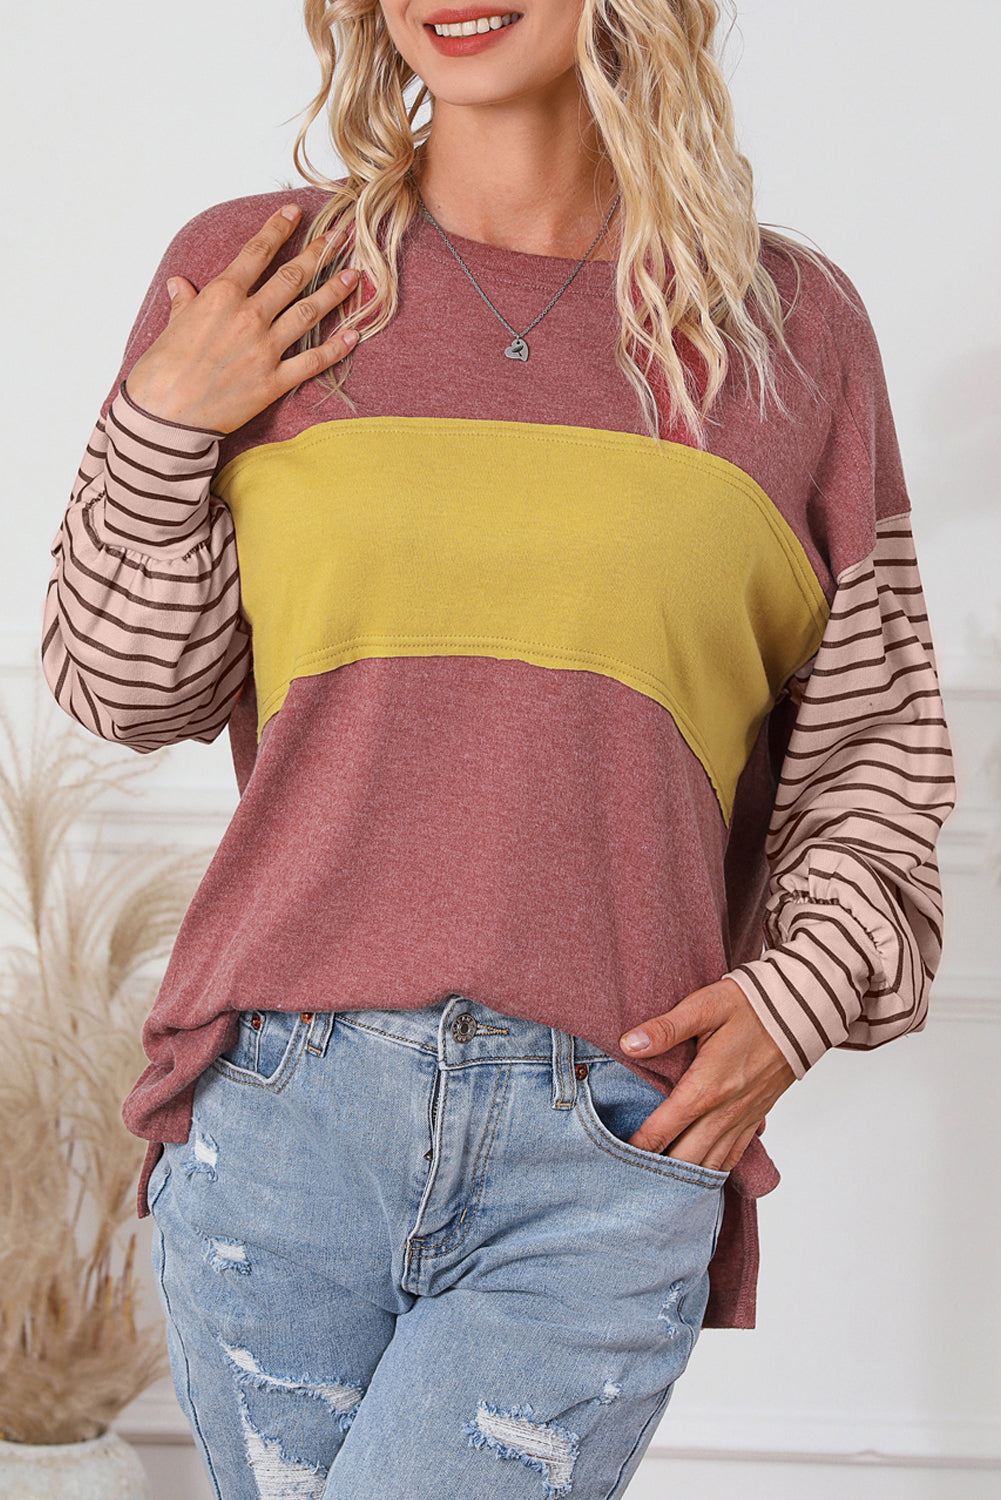 Light French Beige Colorblock Striped Bishop Sleeve Top